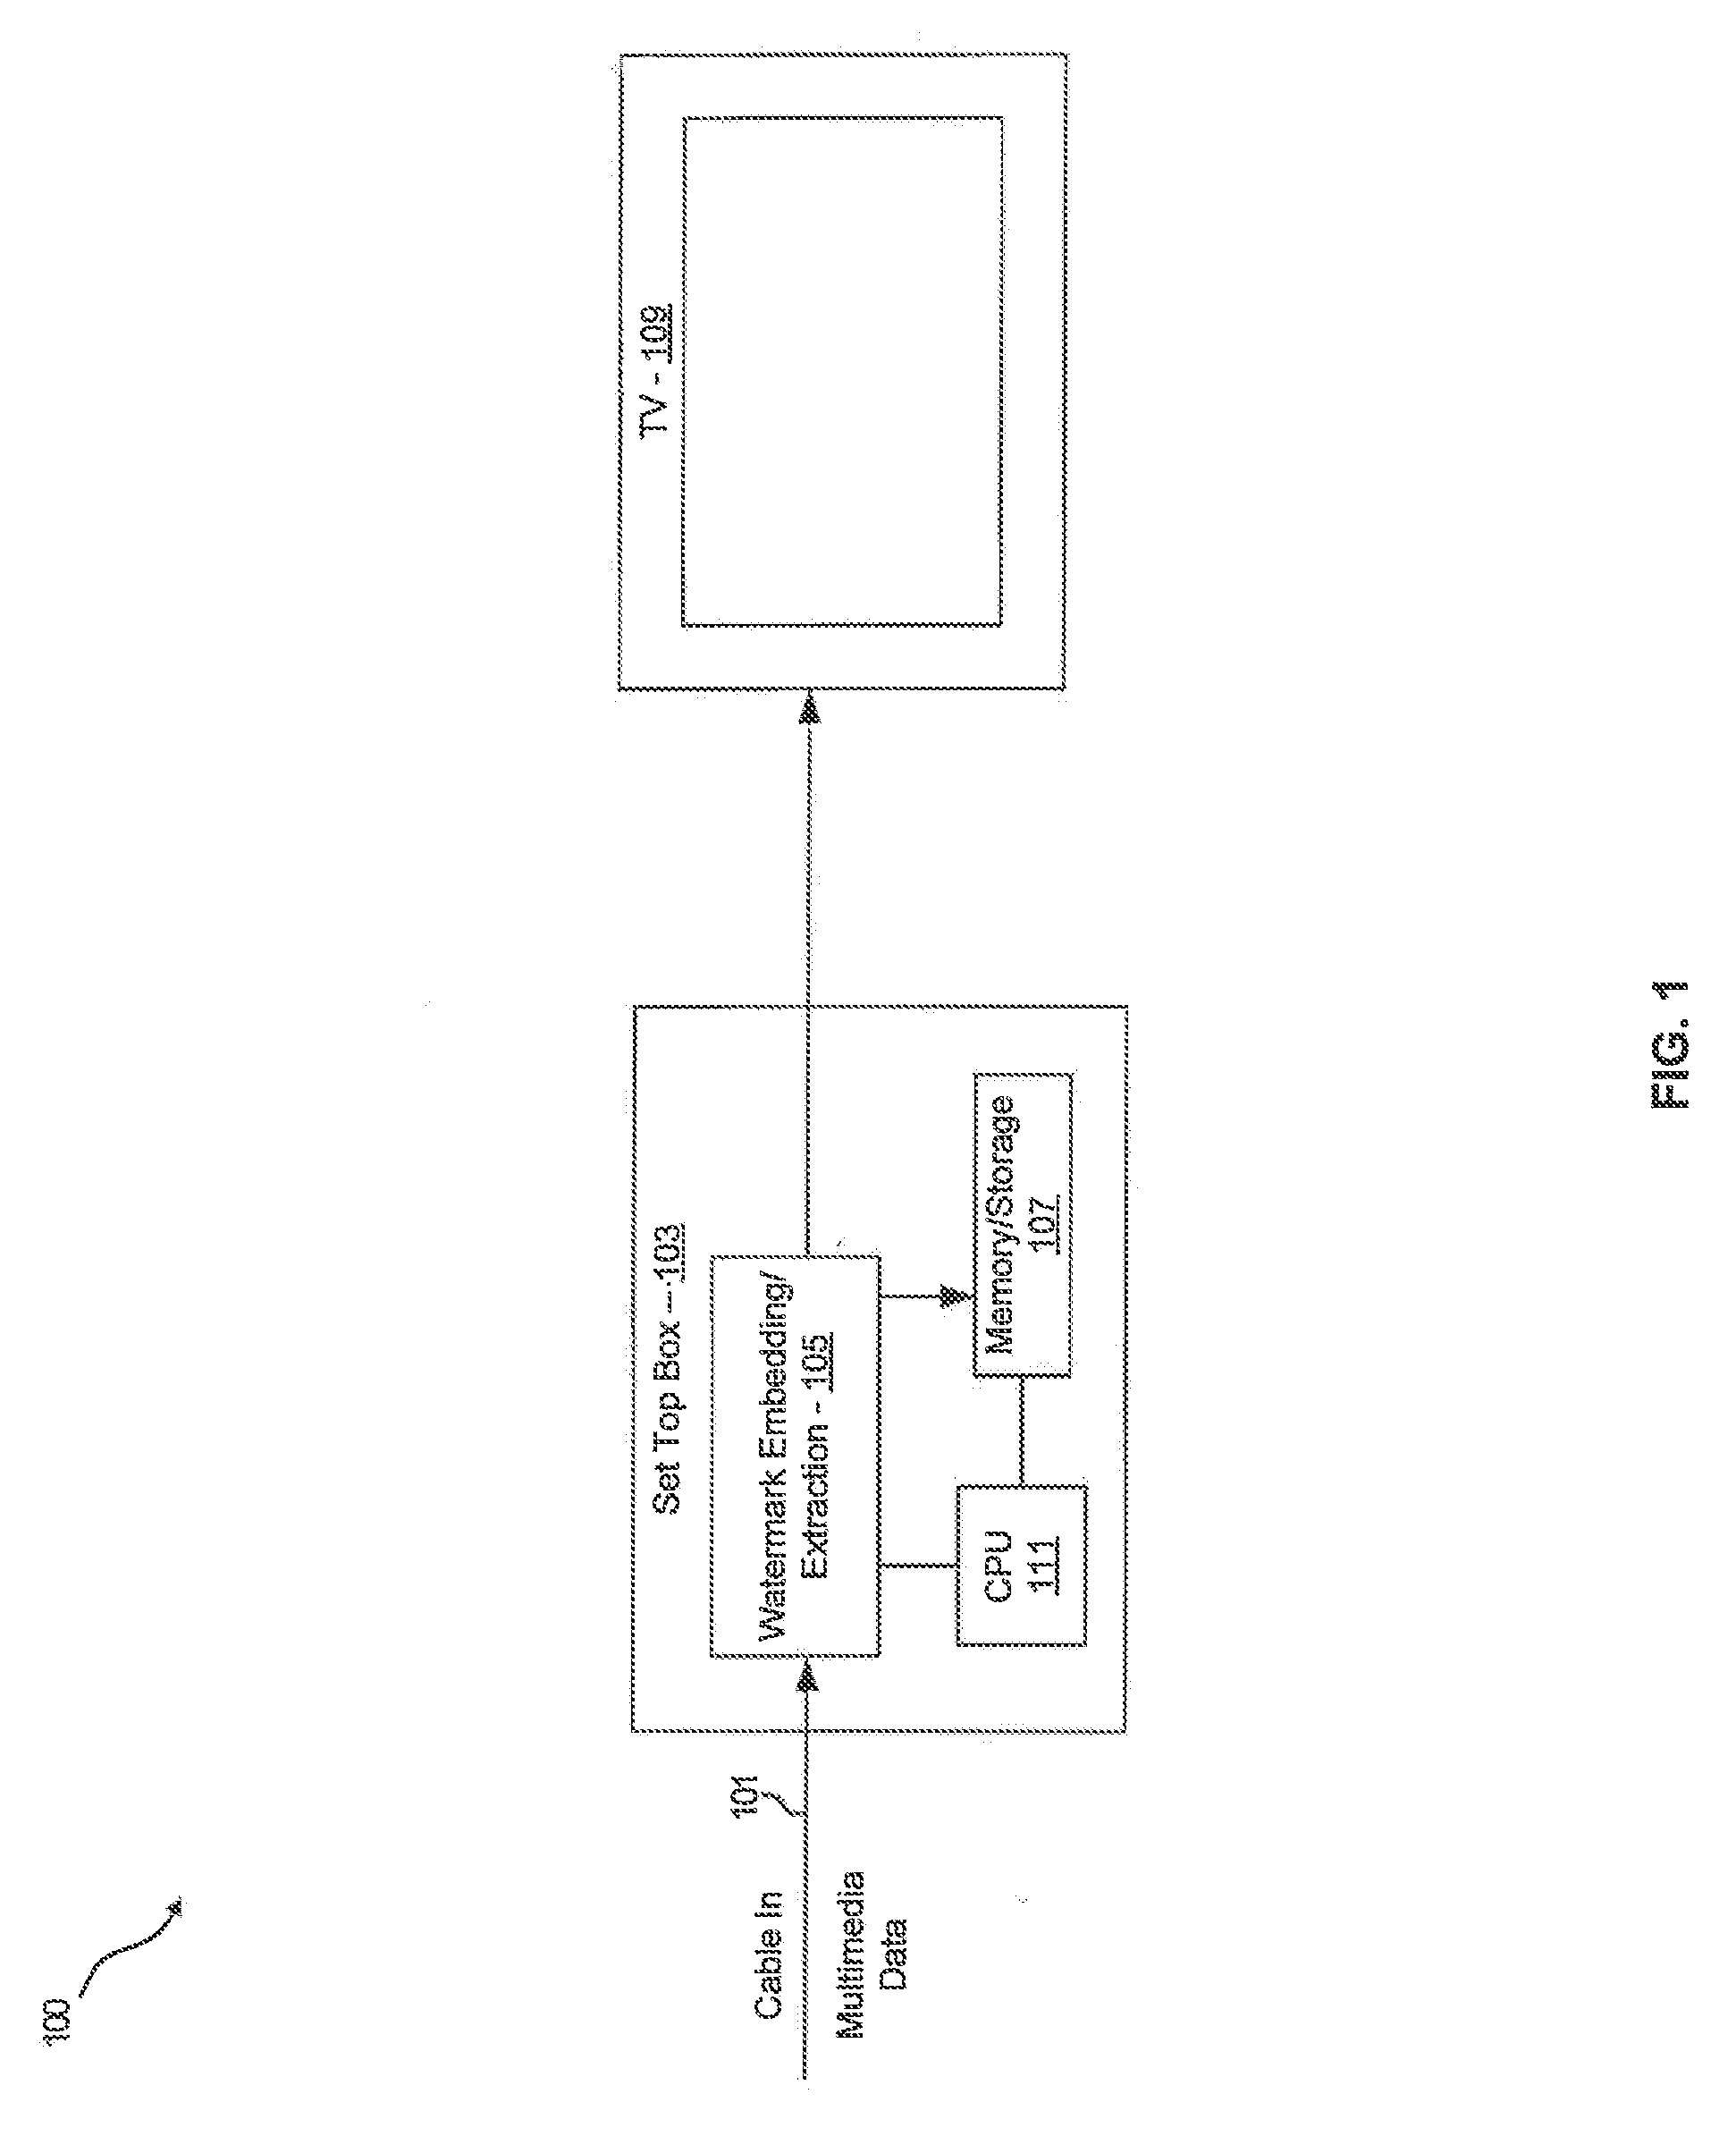 Method and System for Robust Watermark Insertion and Extraction for Digital Set-Top Boxes